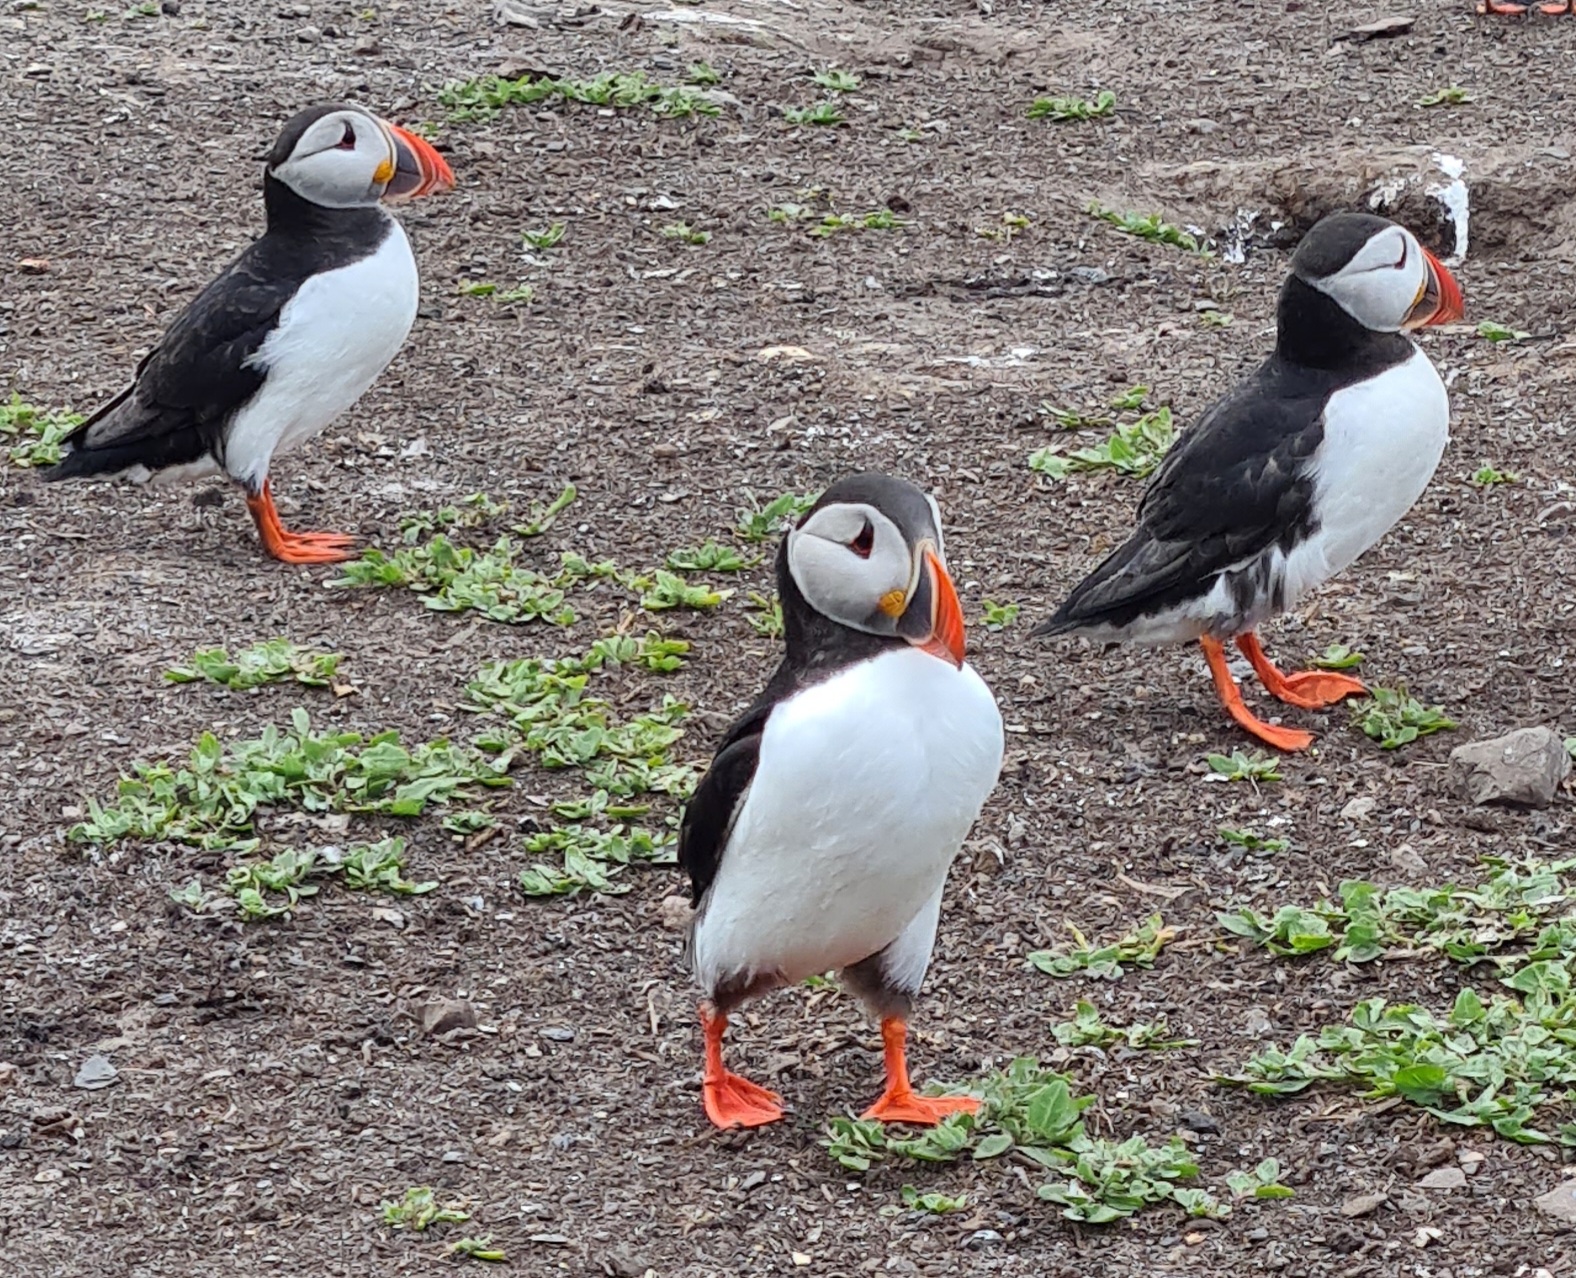 Puffins on the Farne islands Northumberland